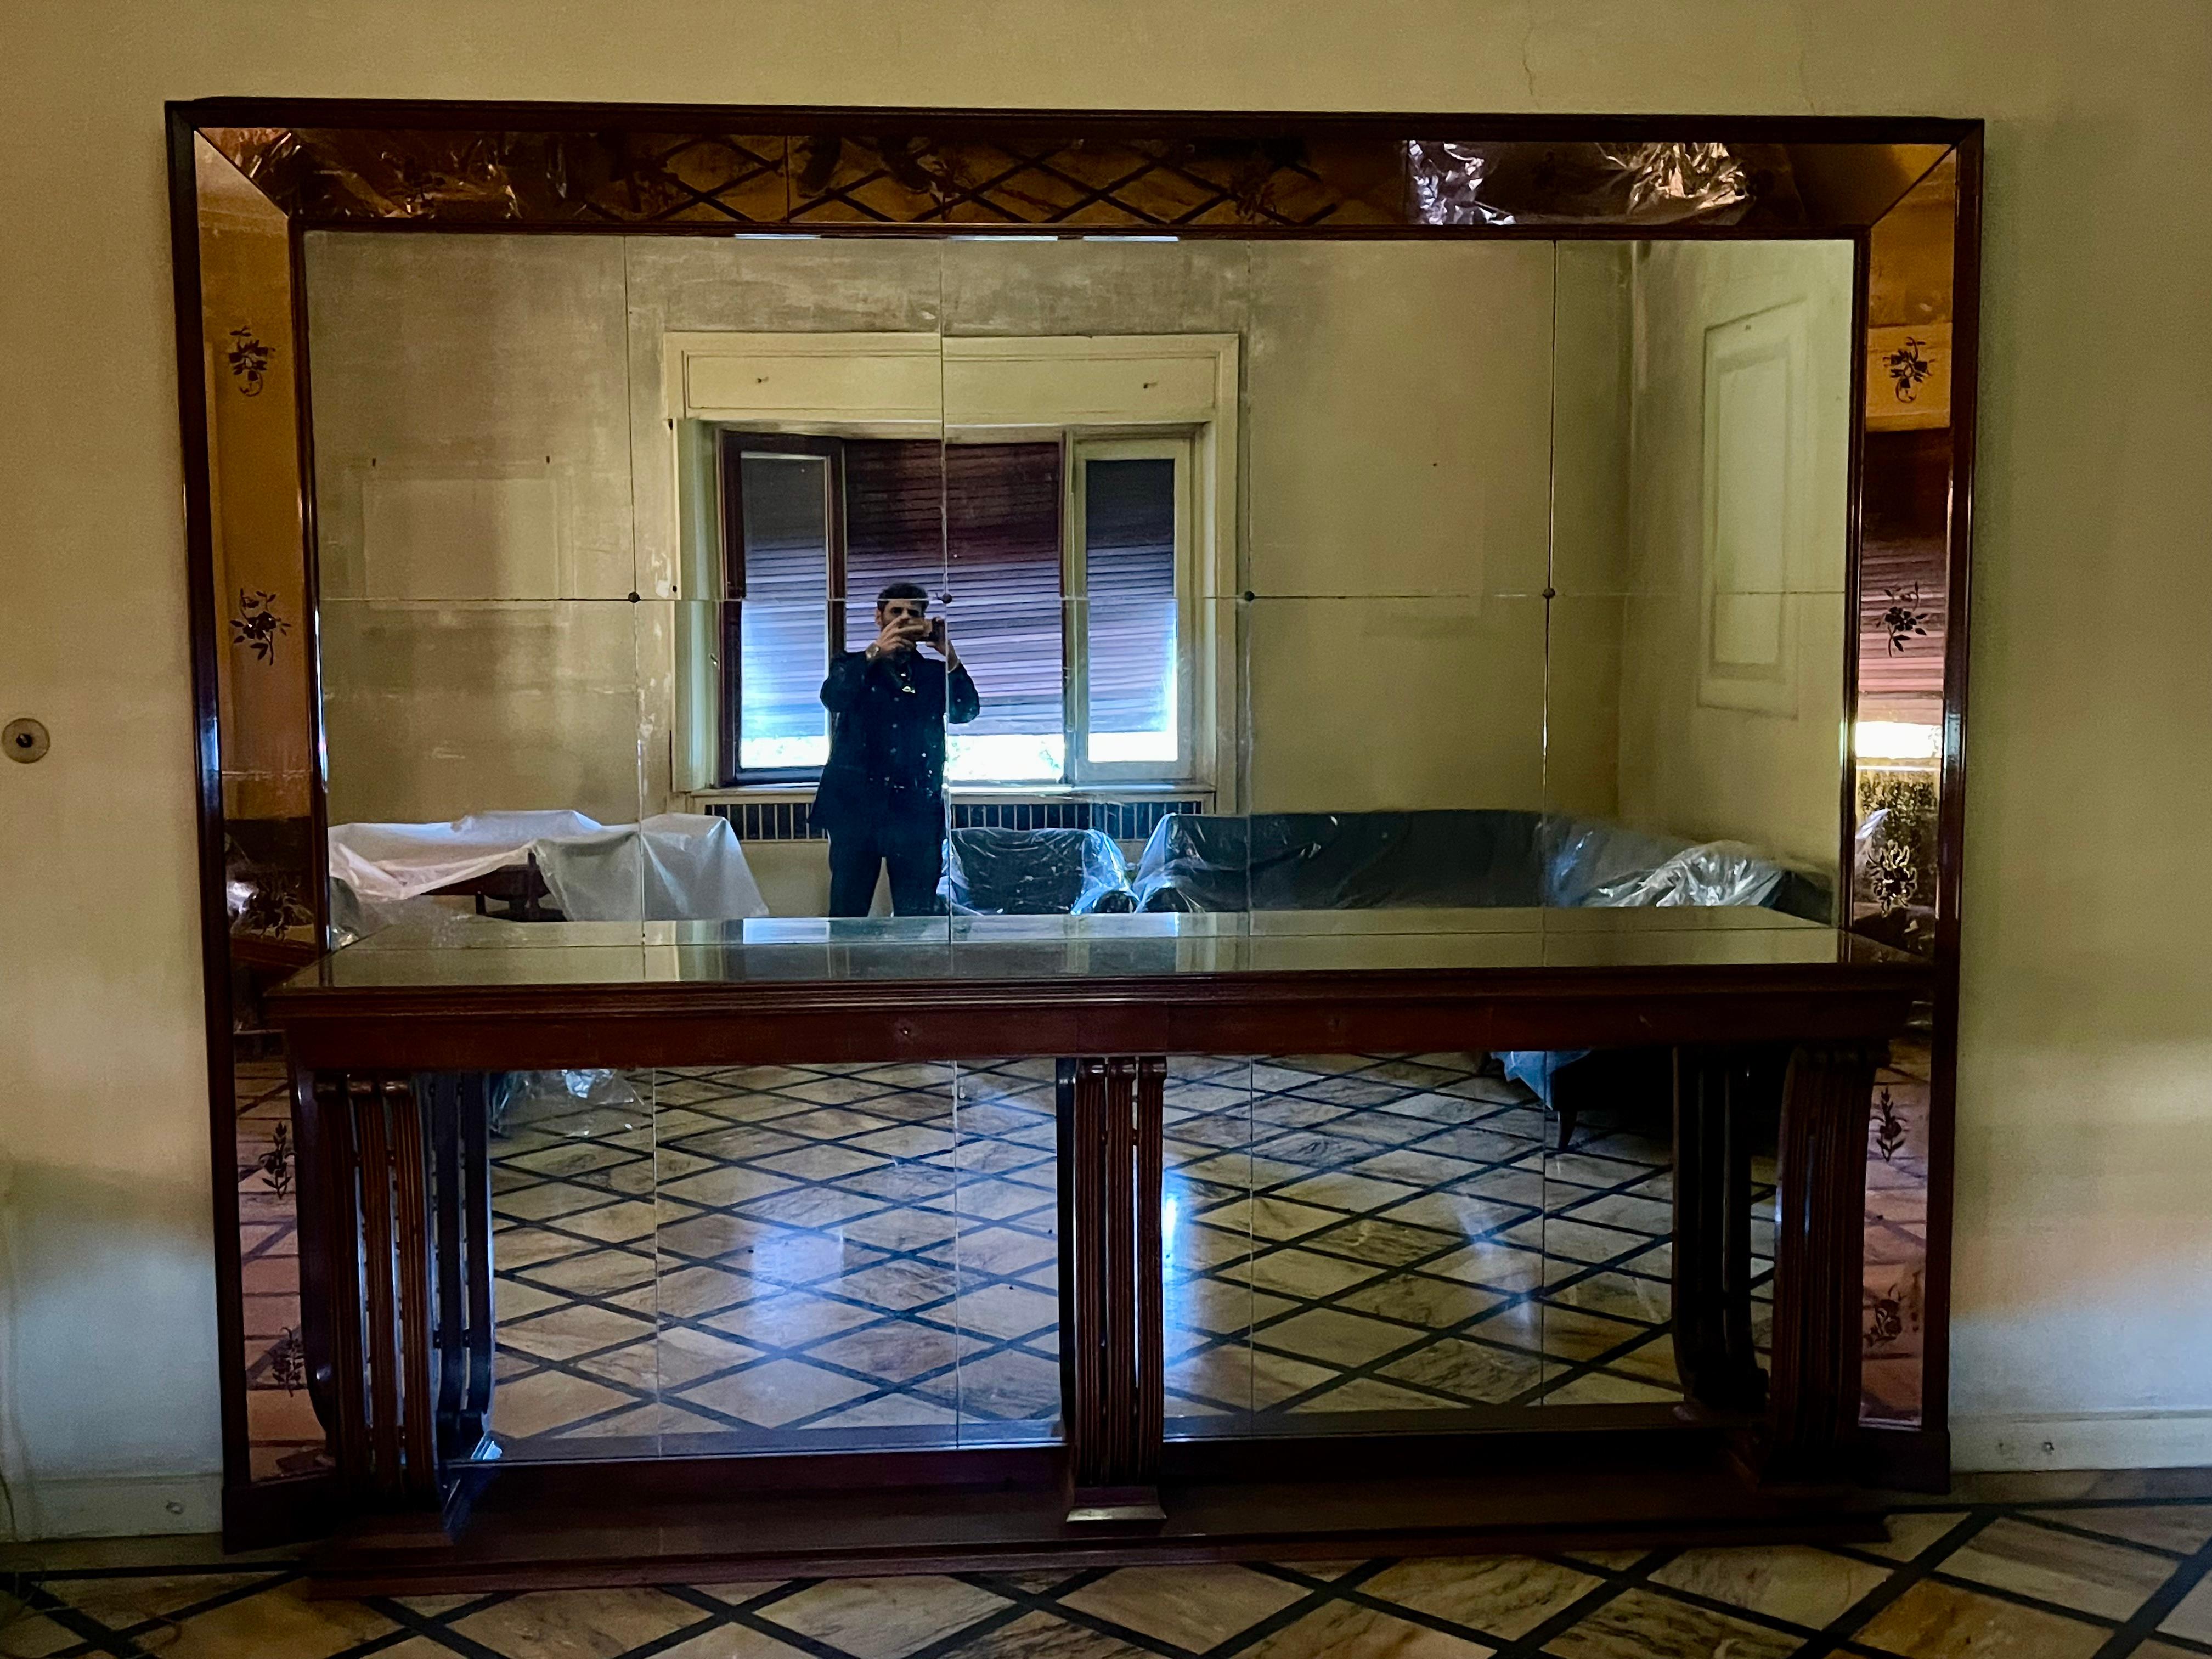 We are looking at an imposing hall or living room mirror with wooden drawer console.
The dimensions are significant, measuring 3 meters wide by 2.45 meters high.
It consists of a large wooden plank with a carved frame, on which are housed a series